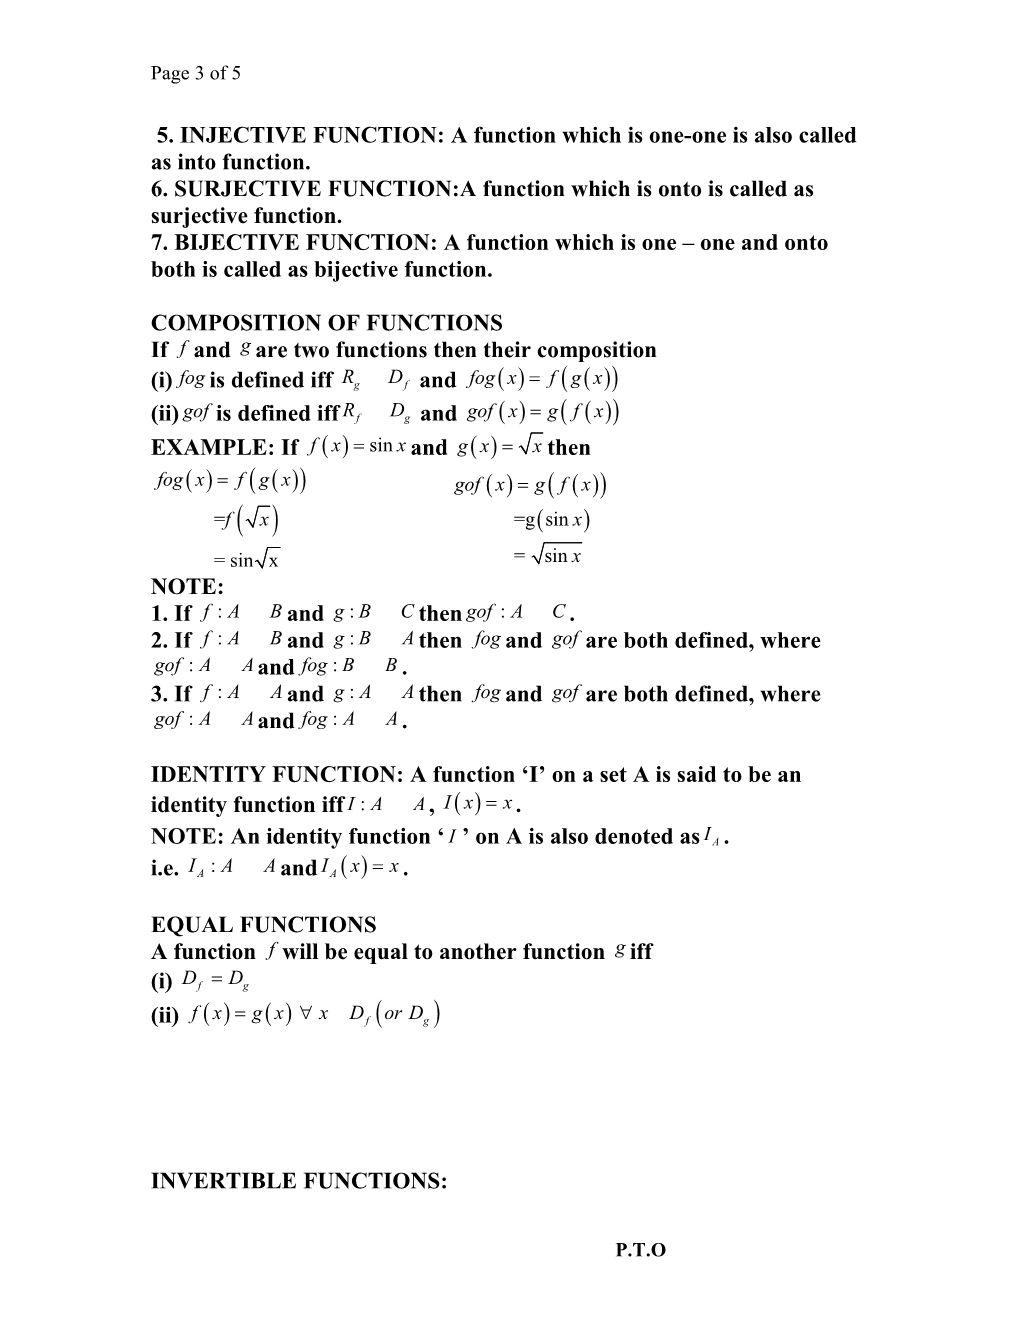 Relations, Functions and Binary Operations